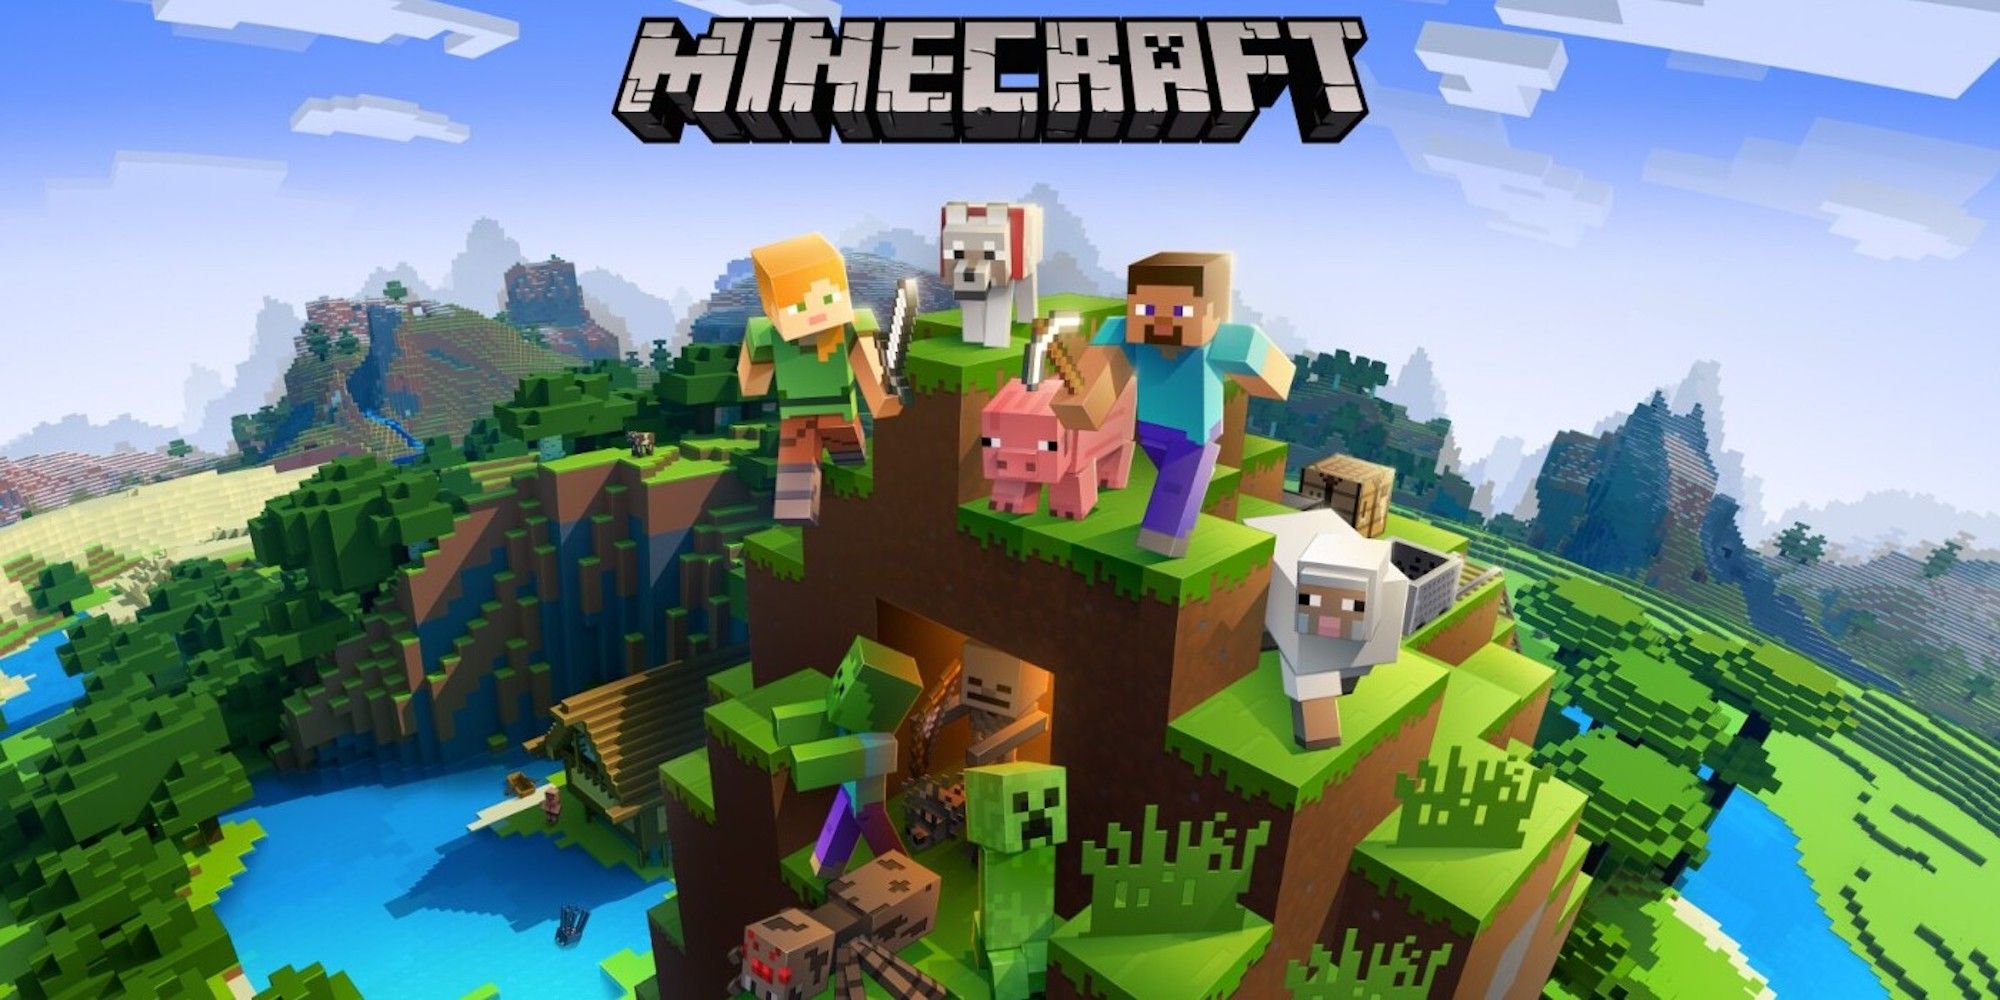 Promo art featuring characters  from Minecraft